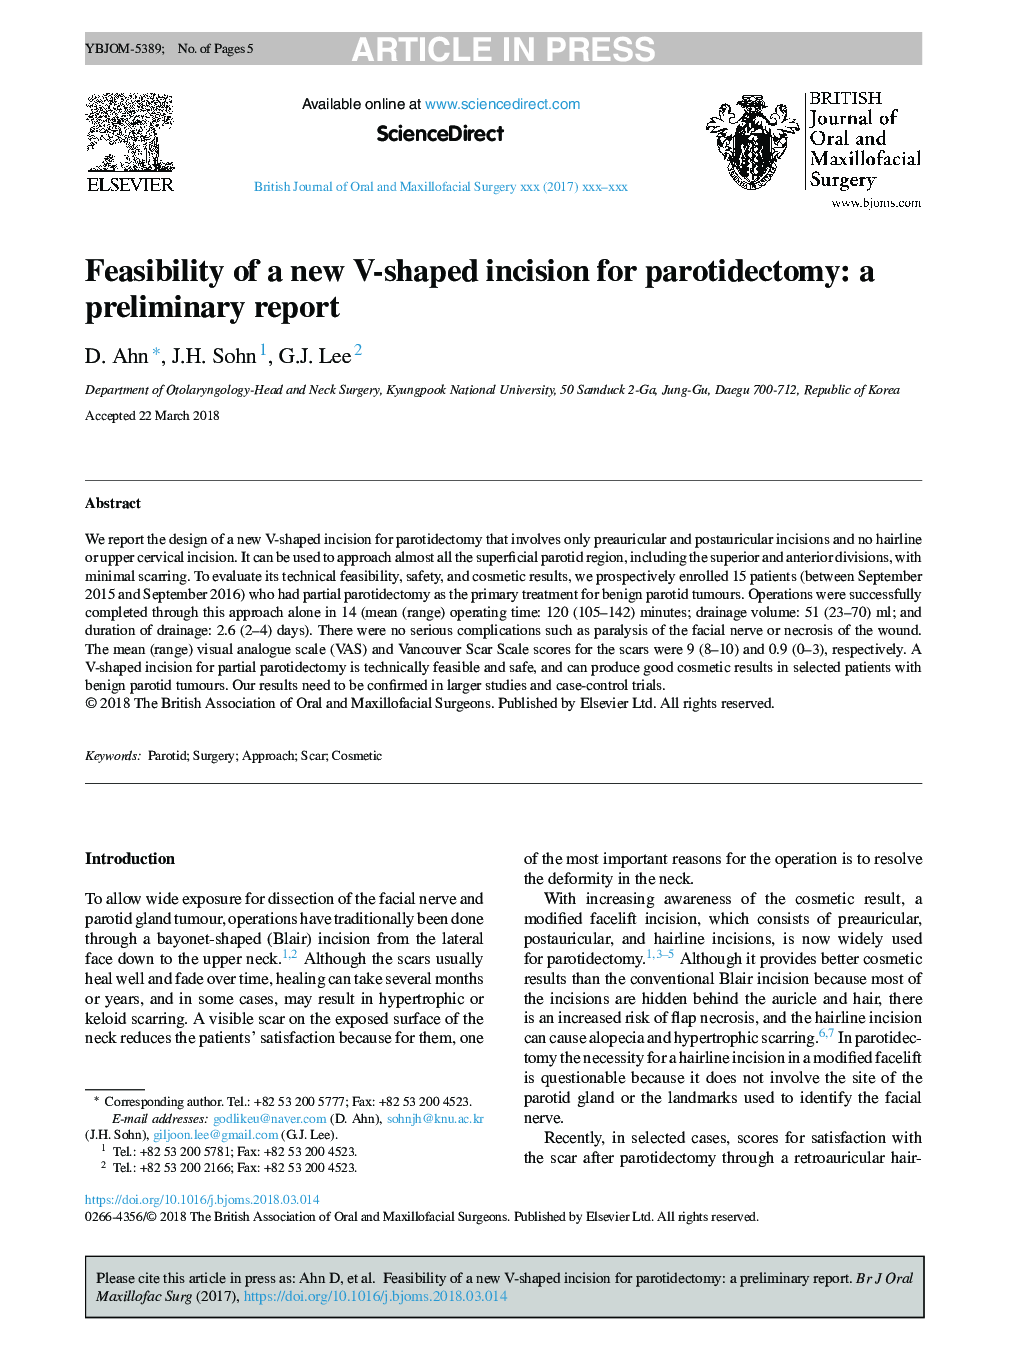 Feasibility of a new V-shaped incision for parotidectomy: a preliminary report